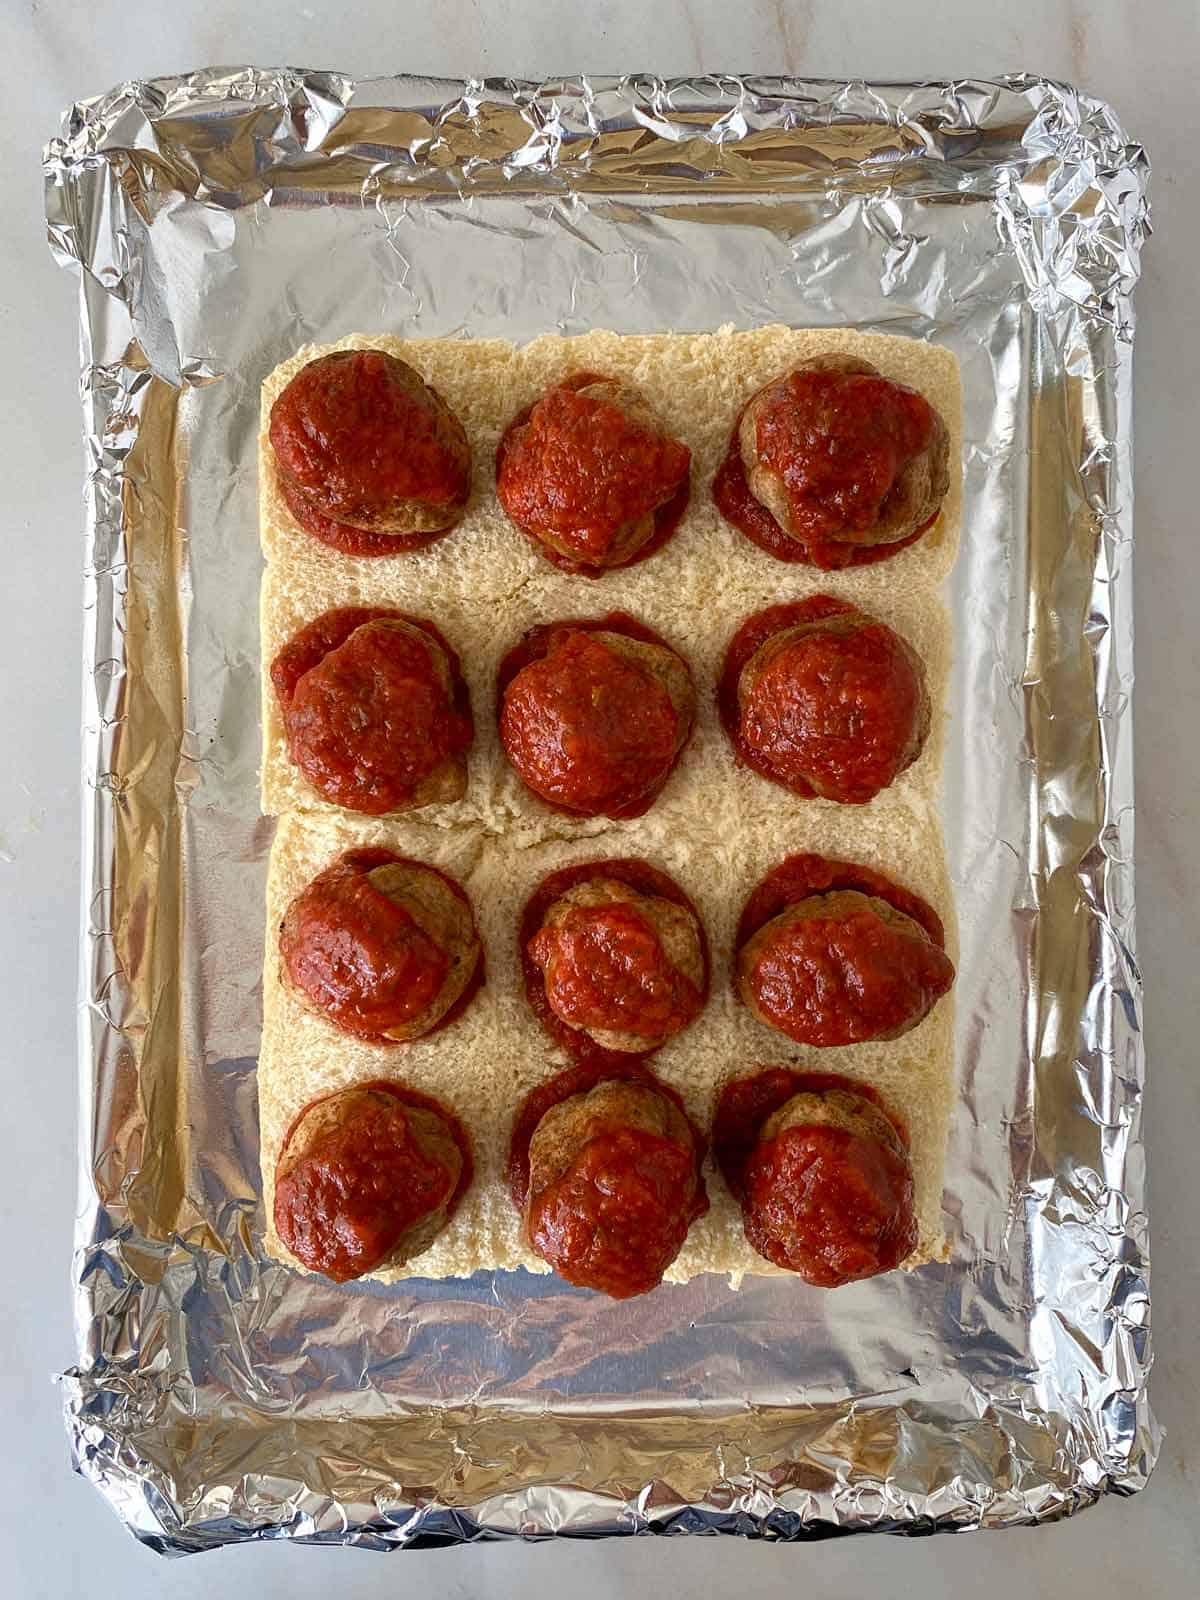 12 meatballs topped with marinara sauce for slider sandwiches.